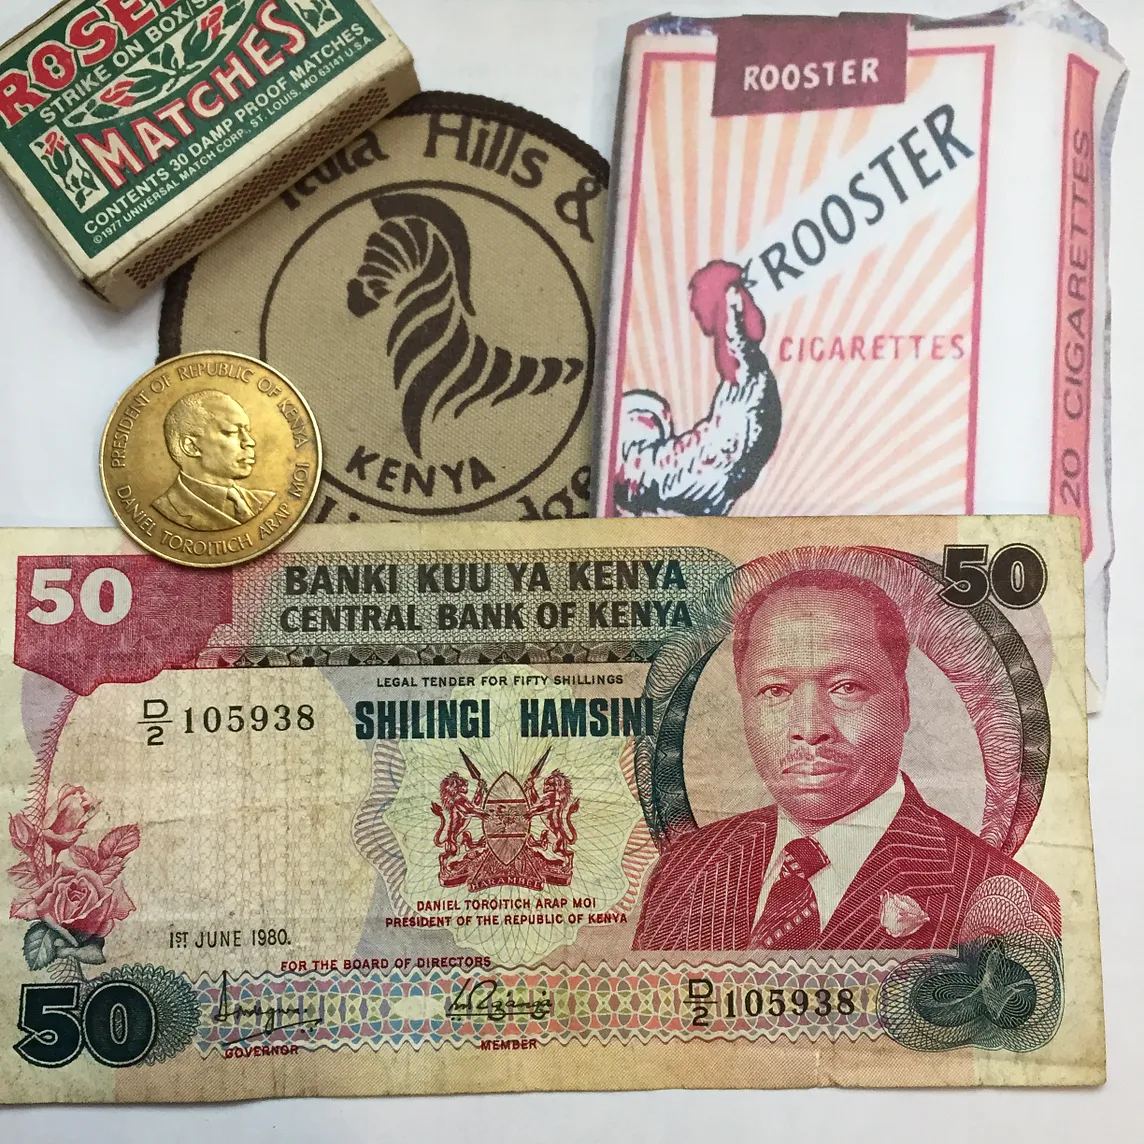 cigarettes, paper money, and a coin from Kenya